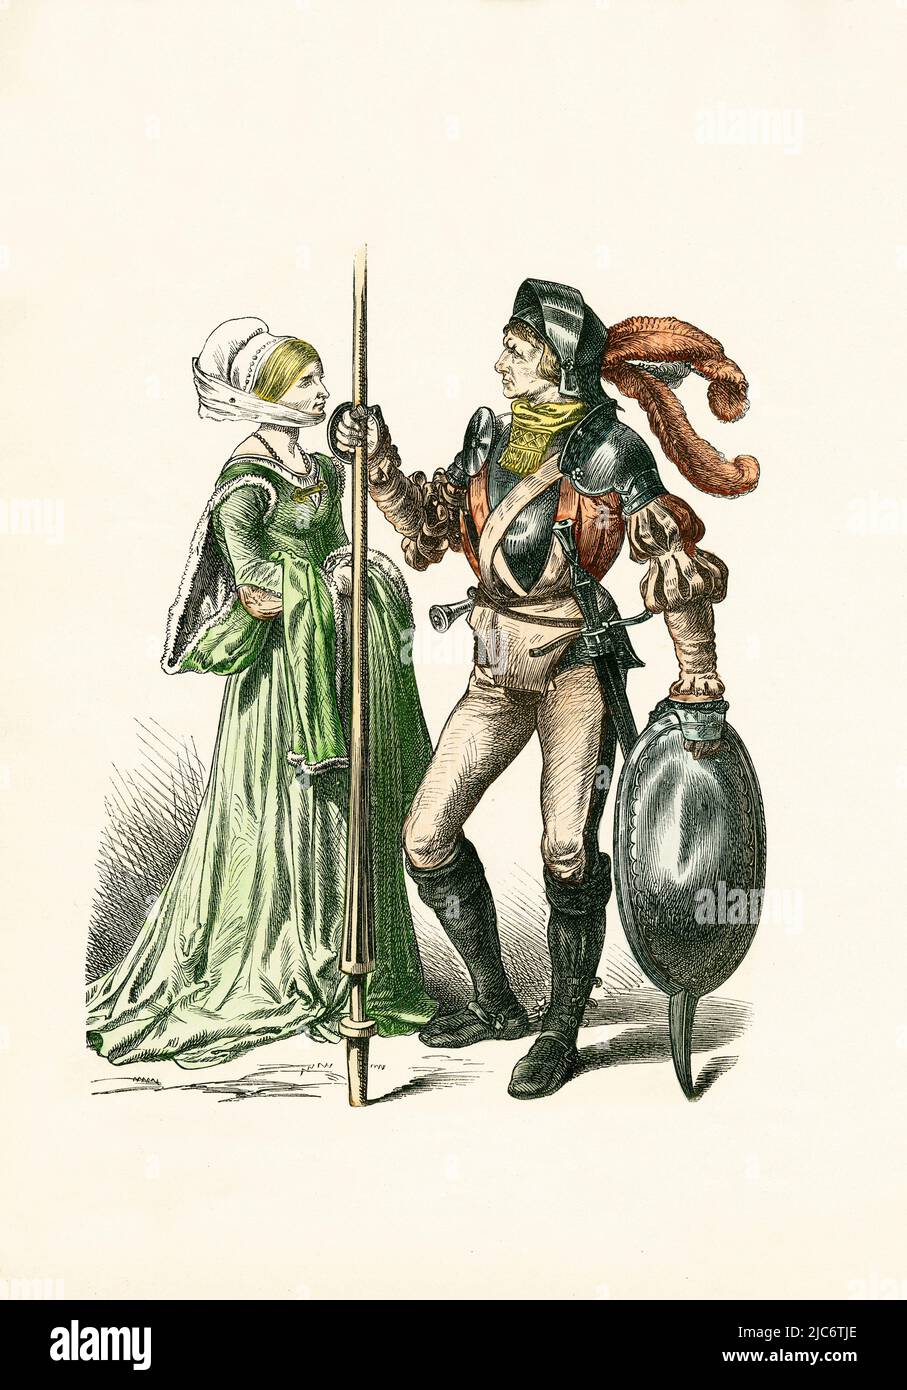 German Townswoman and Townsman in Armor, 1st Third of 16th Century, Illustration, The History of Costume, Braun & Schneider, Munich, Germany, 1861-1880 Stock Photo